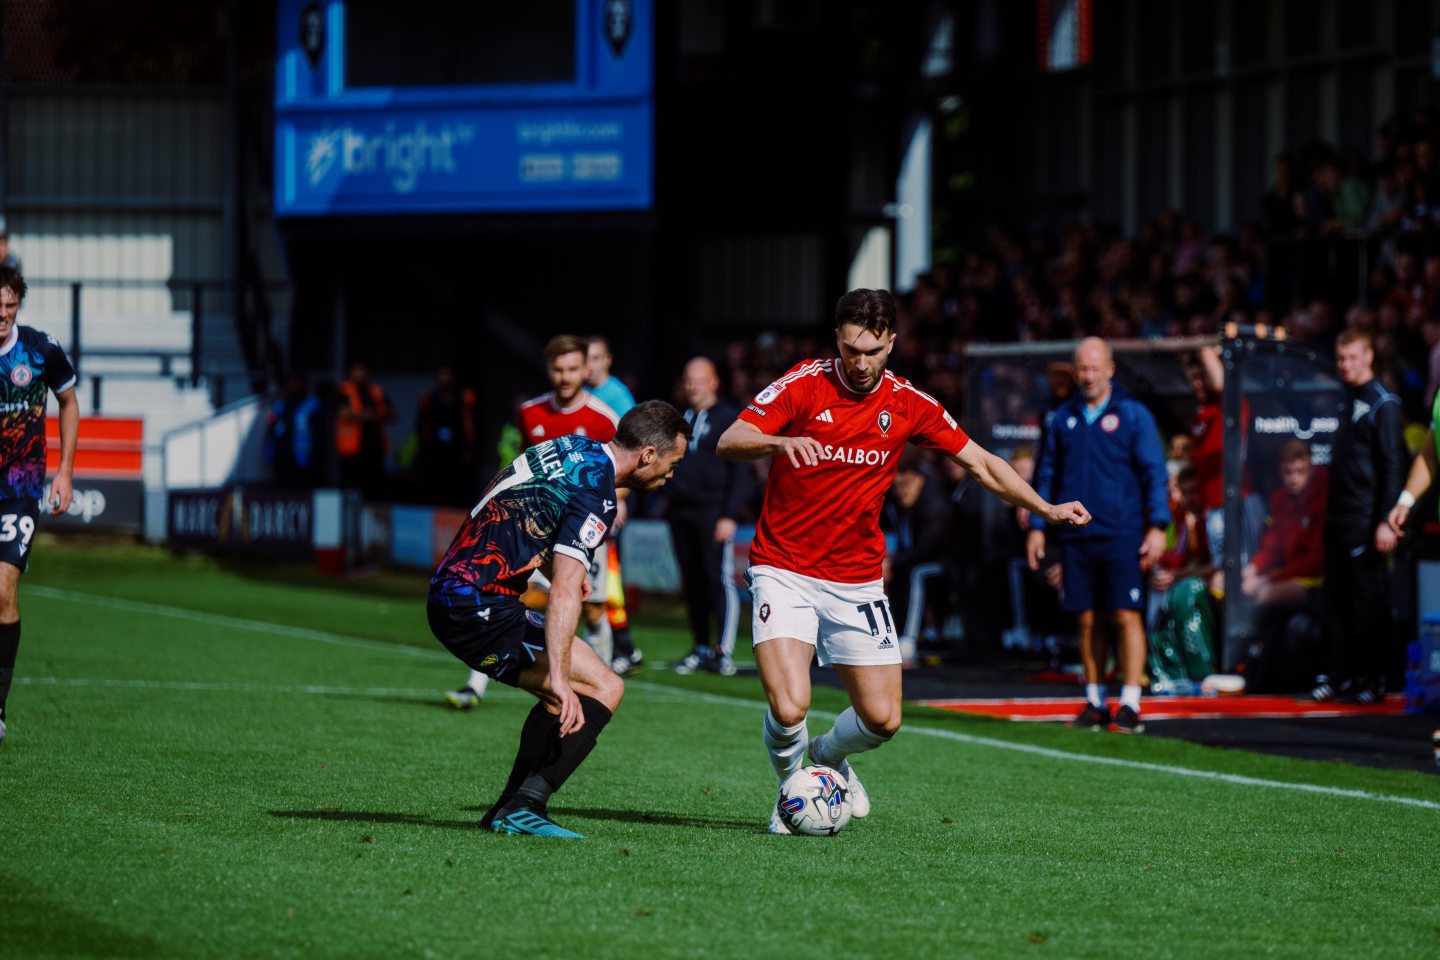 Former Aberdeen winger Connor McLennan in action for Salford City. Image supplied by Salford City